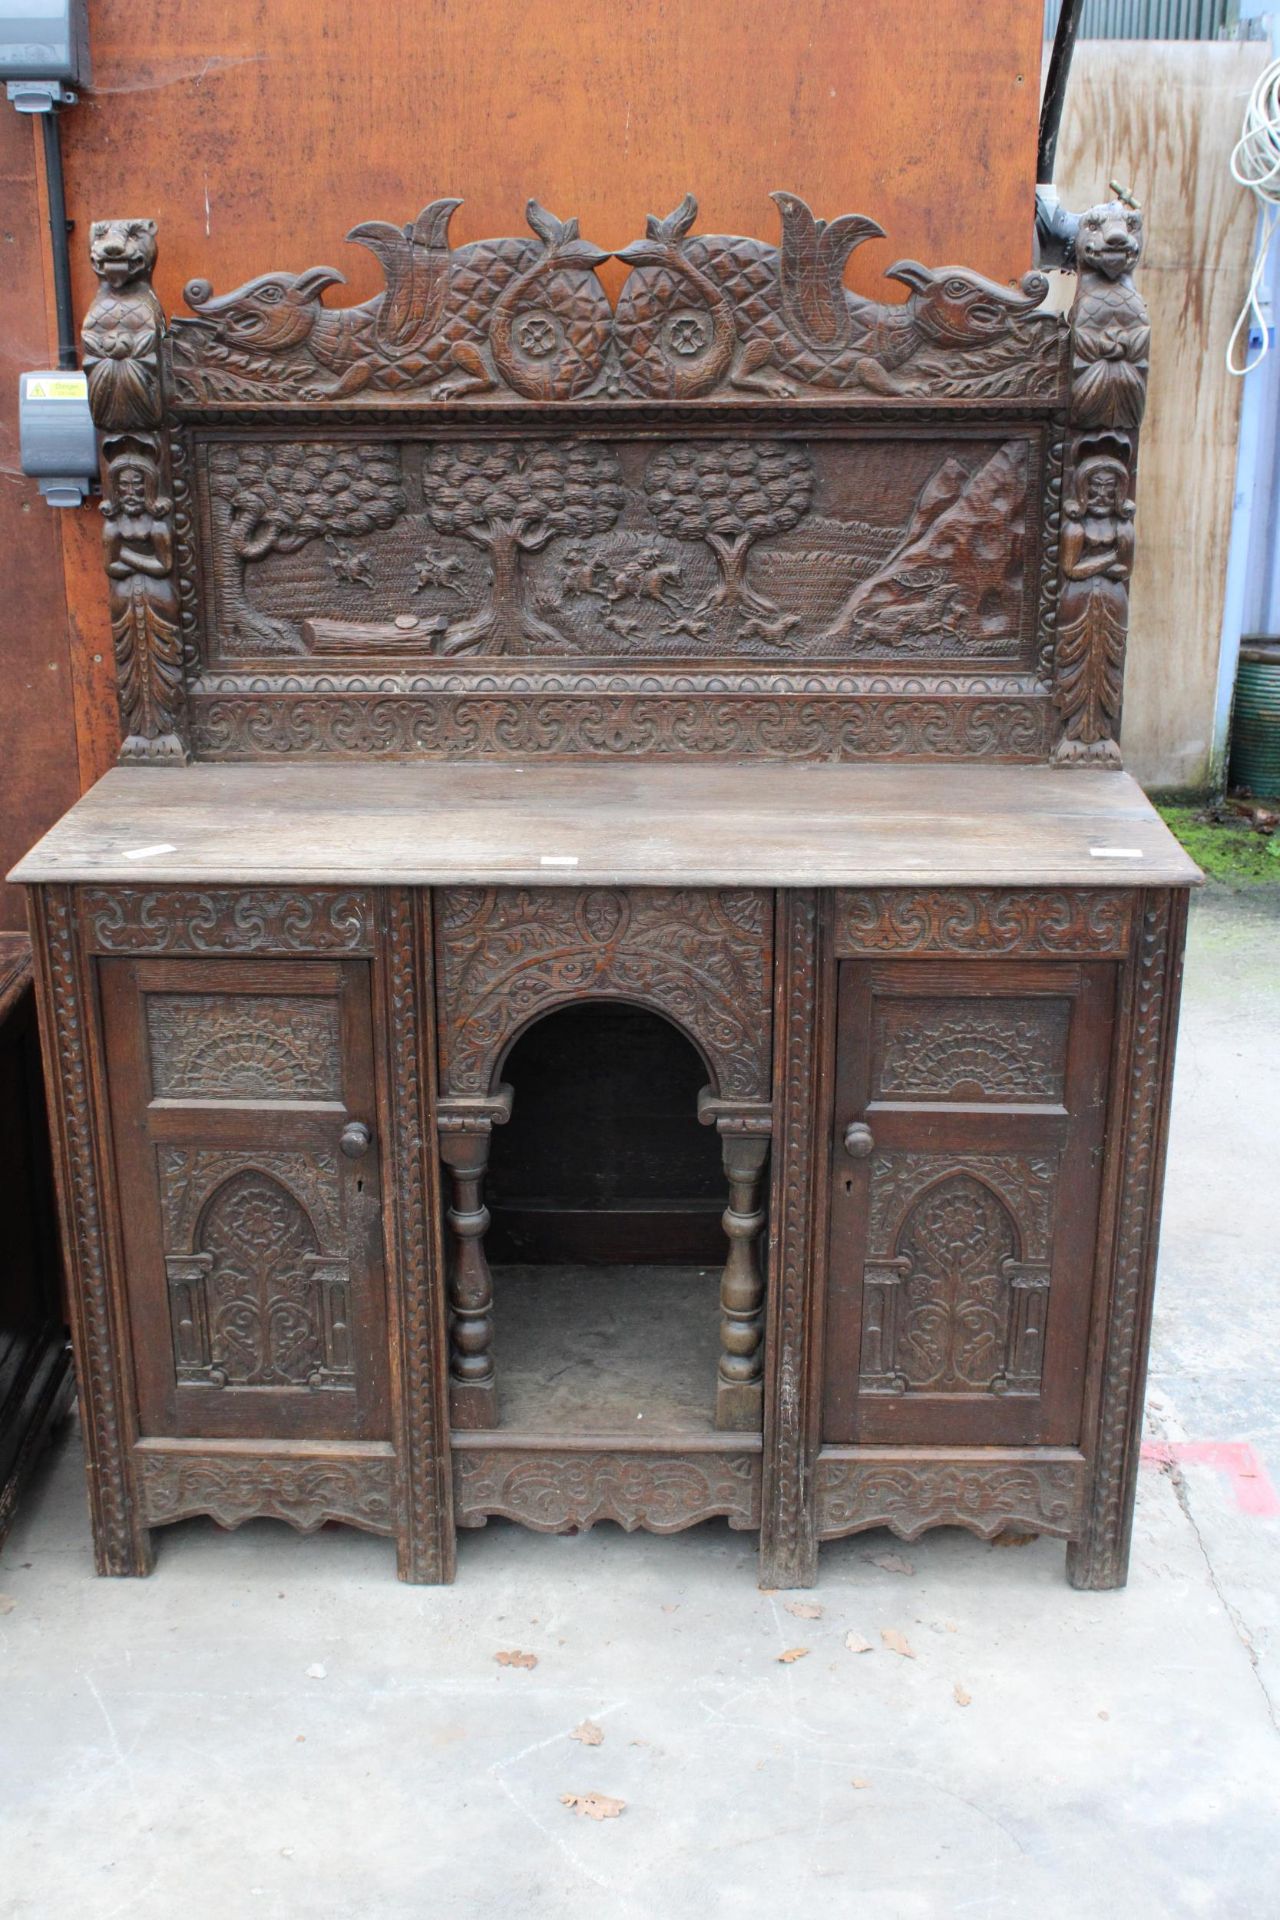 A HEAVILY CARVED GOTHIC OAK SIDEBOARD WITH DEER HUNTING SCENE AND MYTHICAL FIGURE, RAISED BACK,